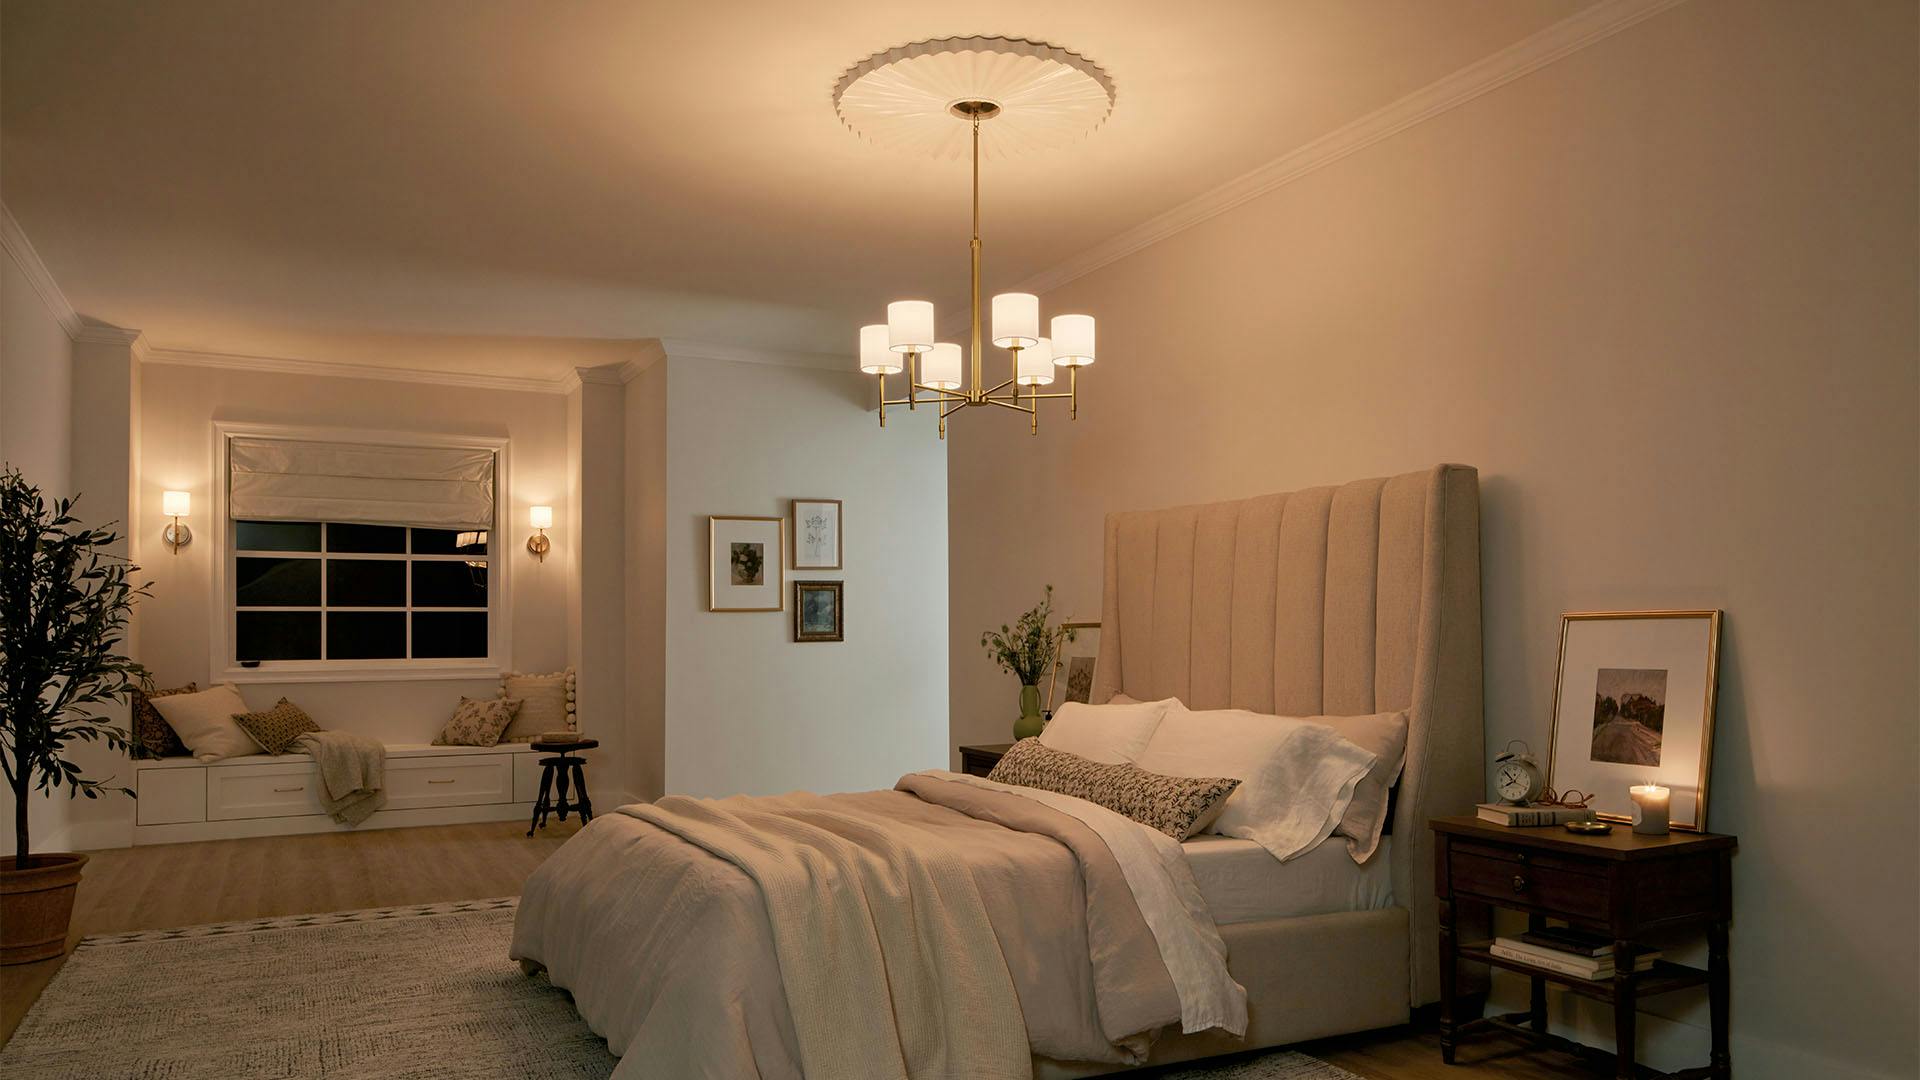 Bedroom at night with Ali 6-light chandelier and Ali wall sconces in brushed natural brass, lights turned on